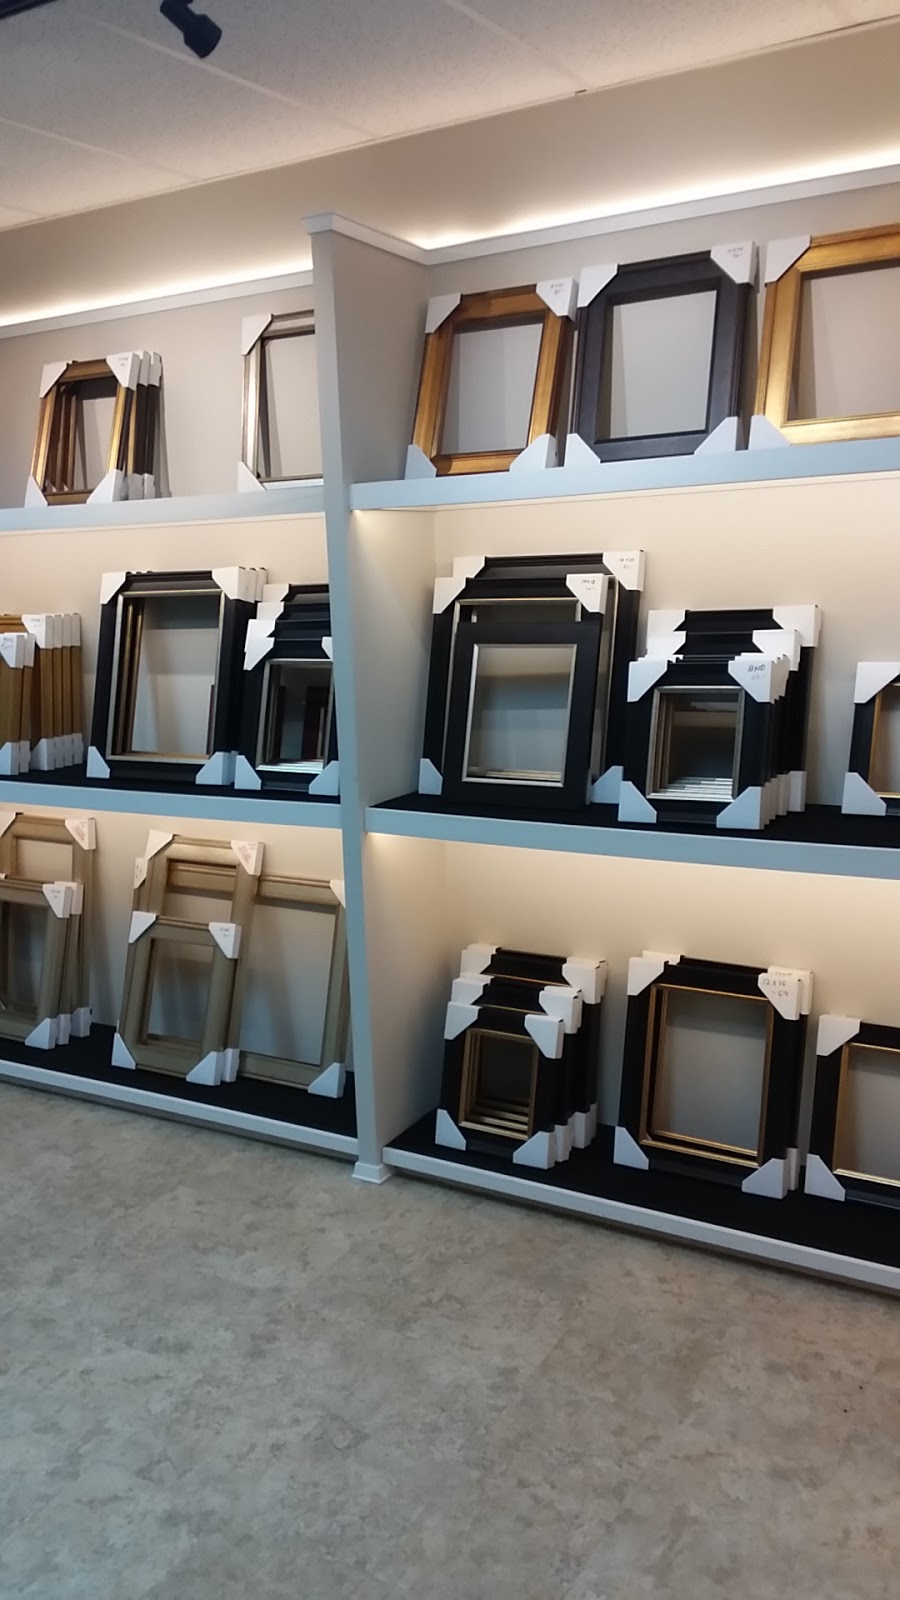 Wholesale Frame Company, LLC | 170 Research Pkwy # 4, Meriden, CT 06450 | Phone: (203) 238-9841